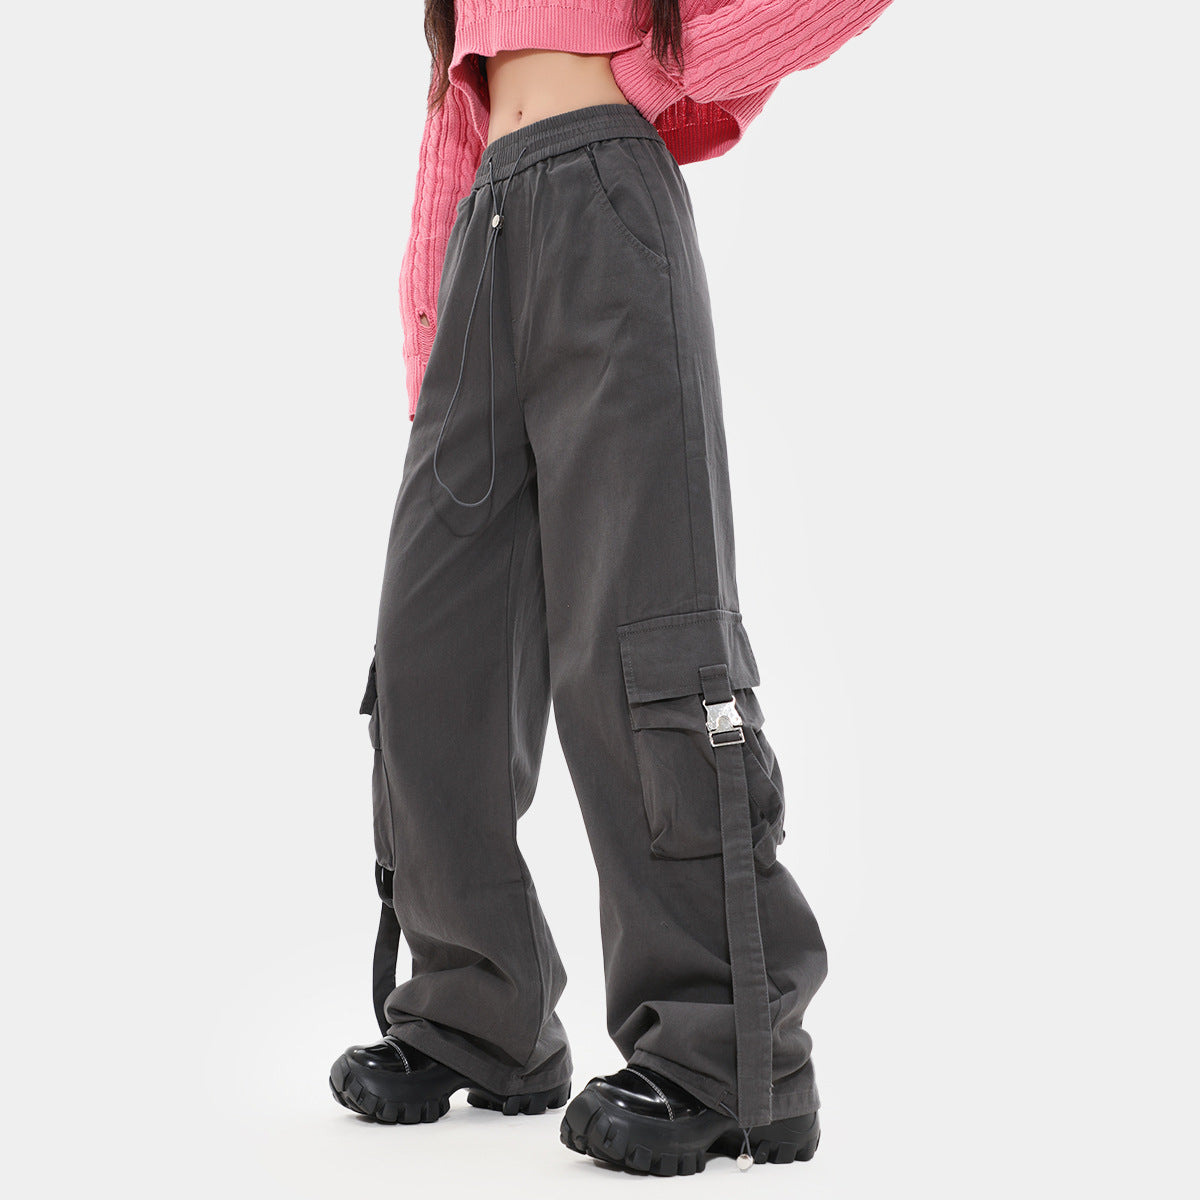 Unisex Floor Mopping Overalls Trousers